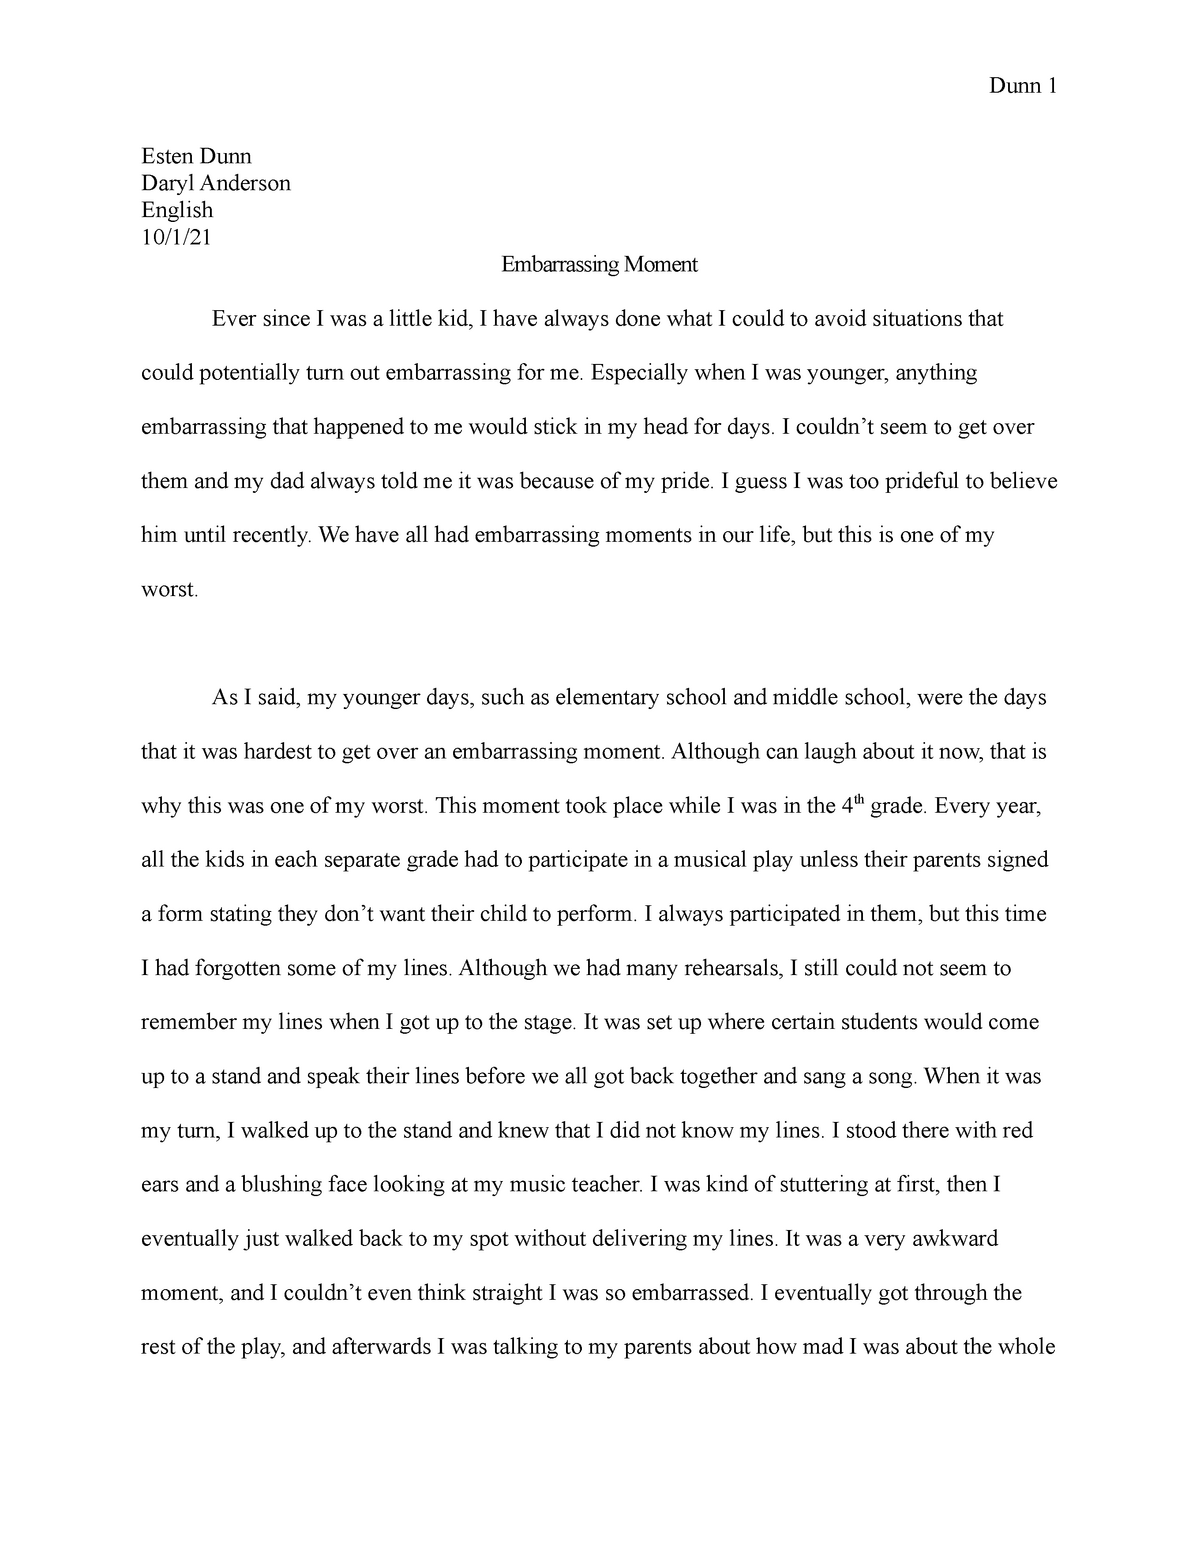 embarrassed moment essay